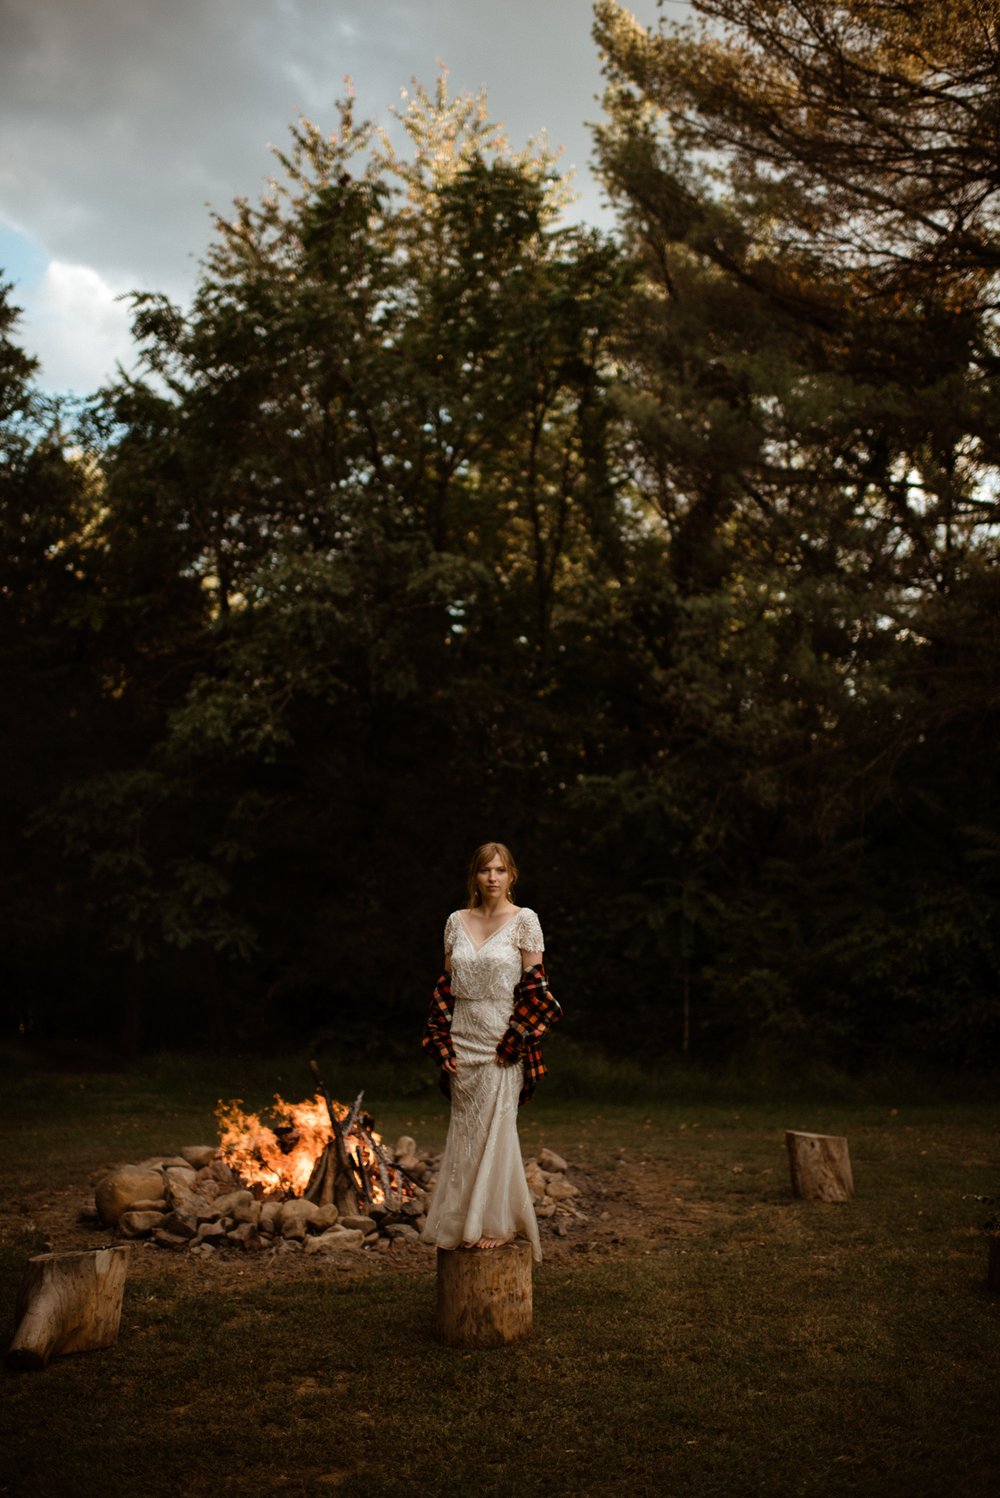 Sill and Glade Cabin Elopement in Virginia - Mountain Airbnb Elopement - White Sails Creative - Blue Ridge Mountains Elopement Cabin Inspiration_23.jpg